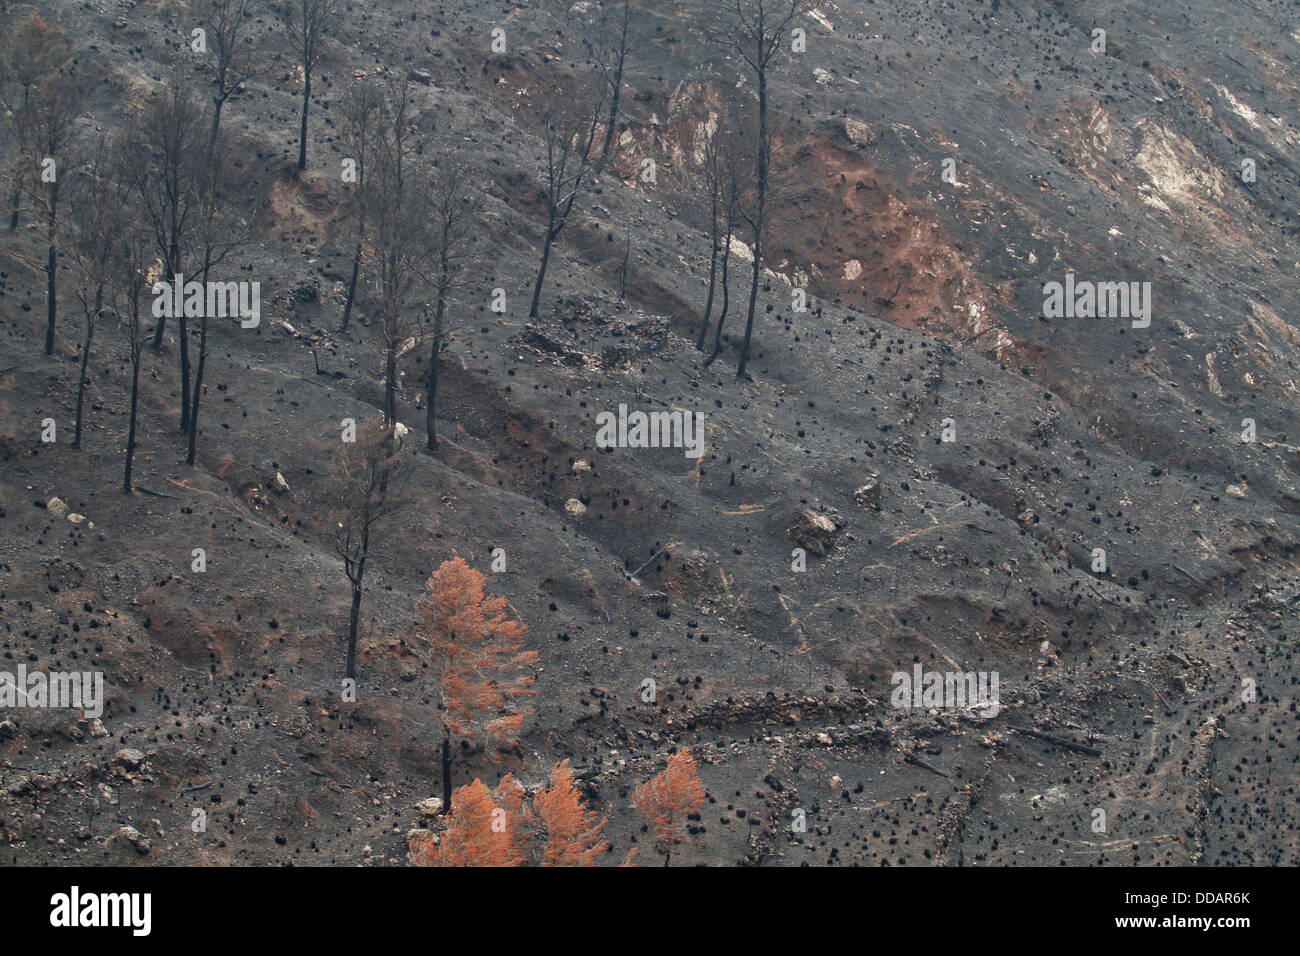 Burned area seen after a wildfire that razed more than 2300 hectares in the Spanish island of Mallorca. Stock Photo